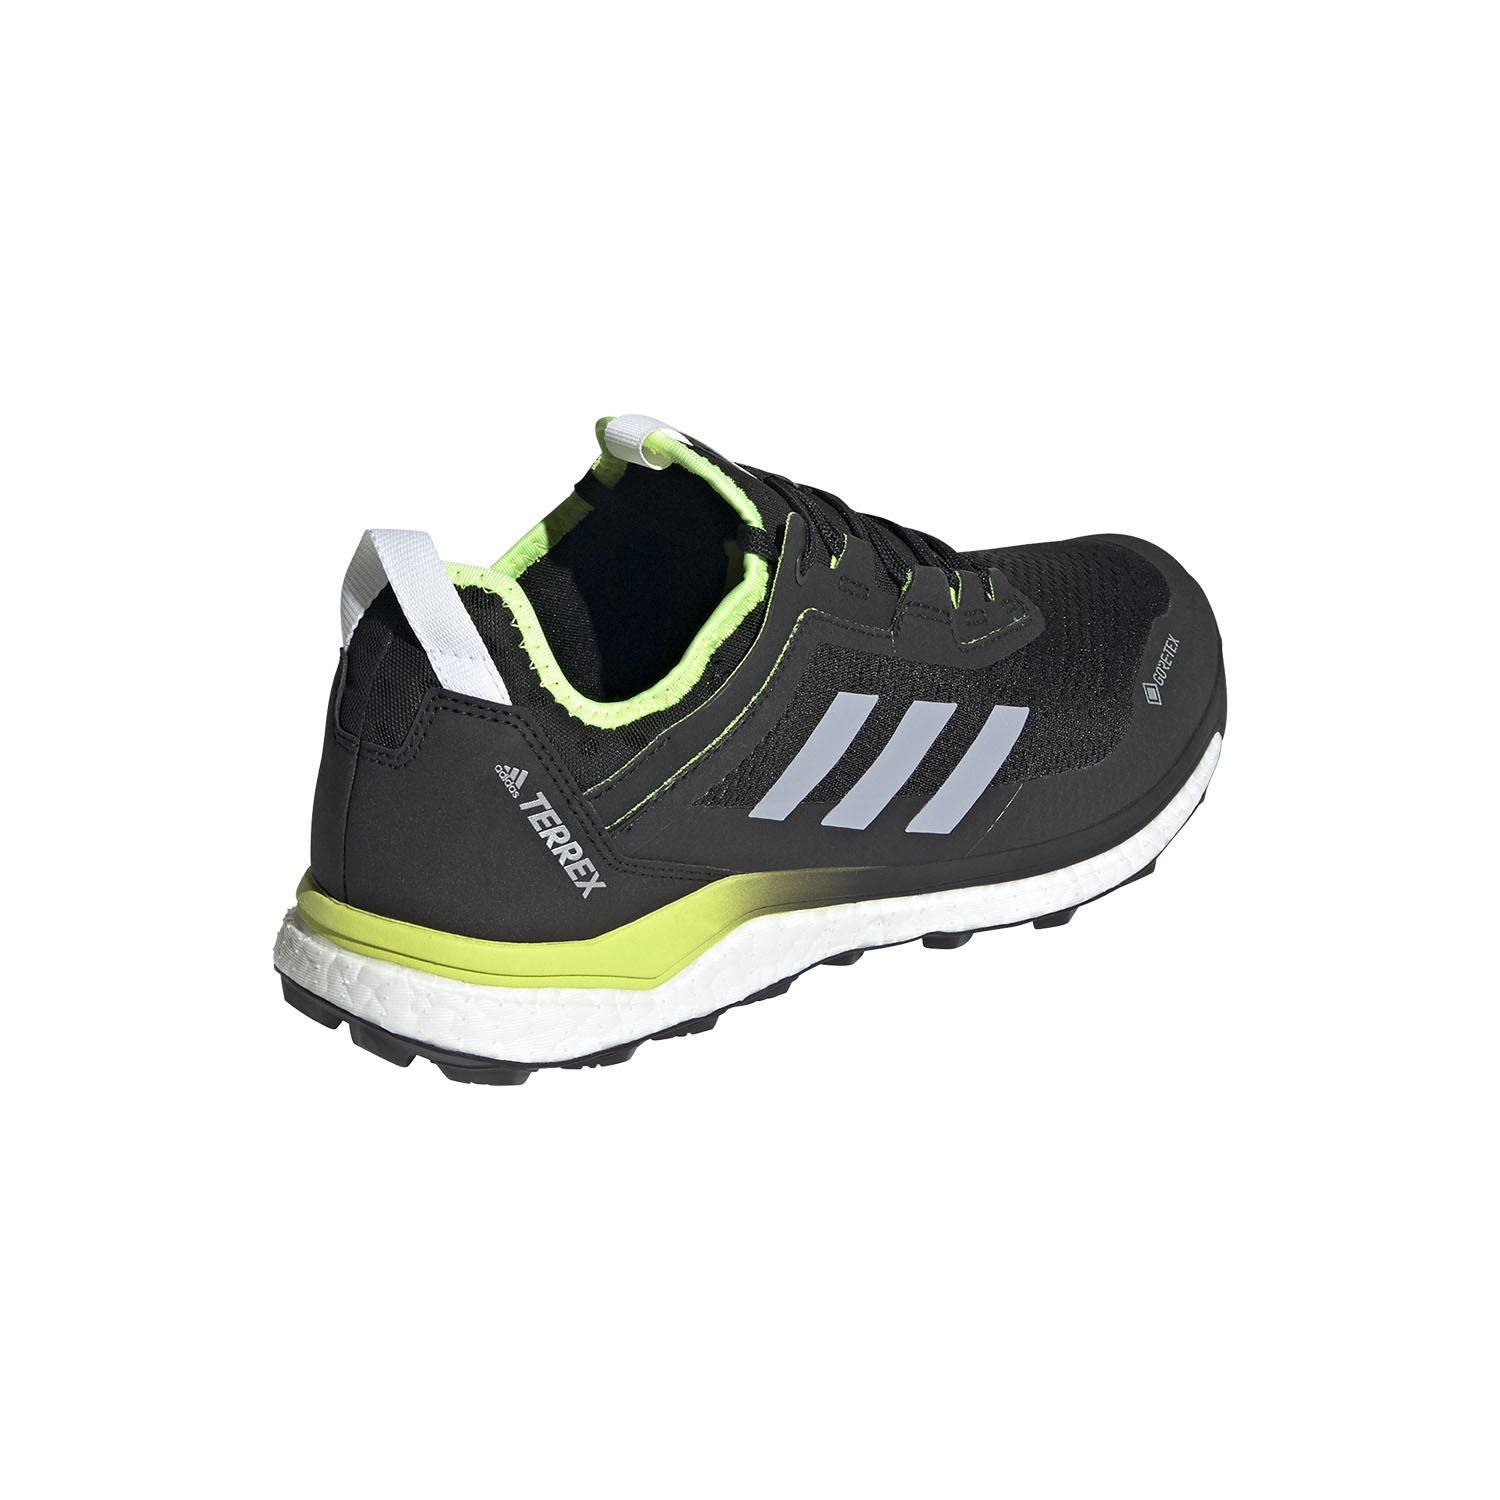 adidas performance shoes price